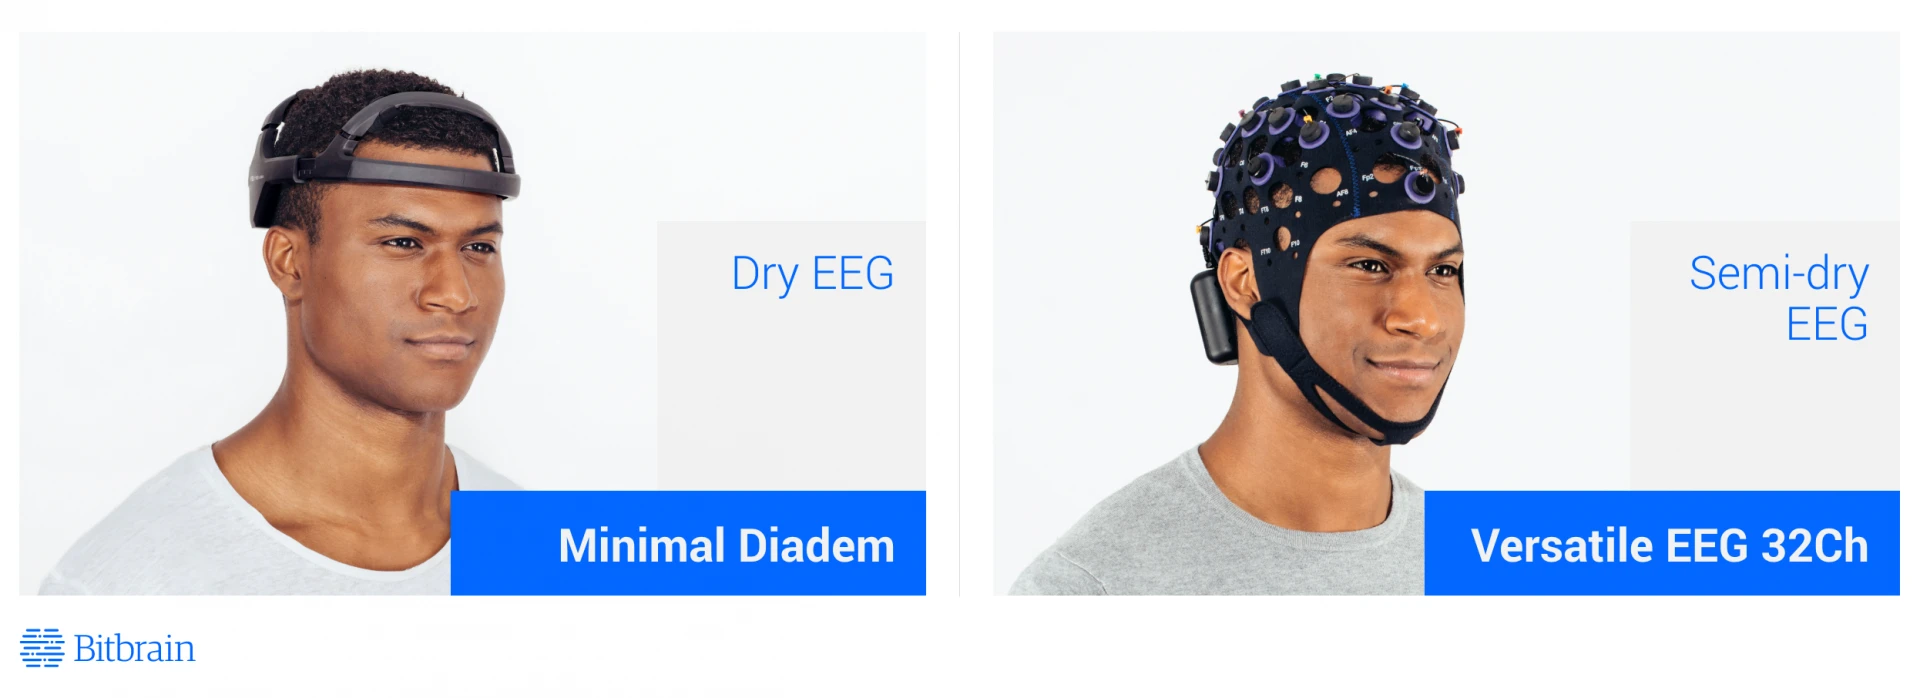 How to Select Dry Egg Bitbrain 1